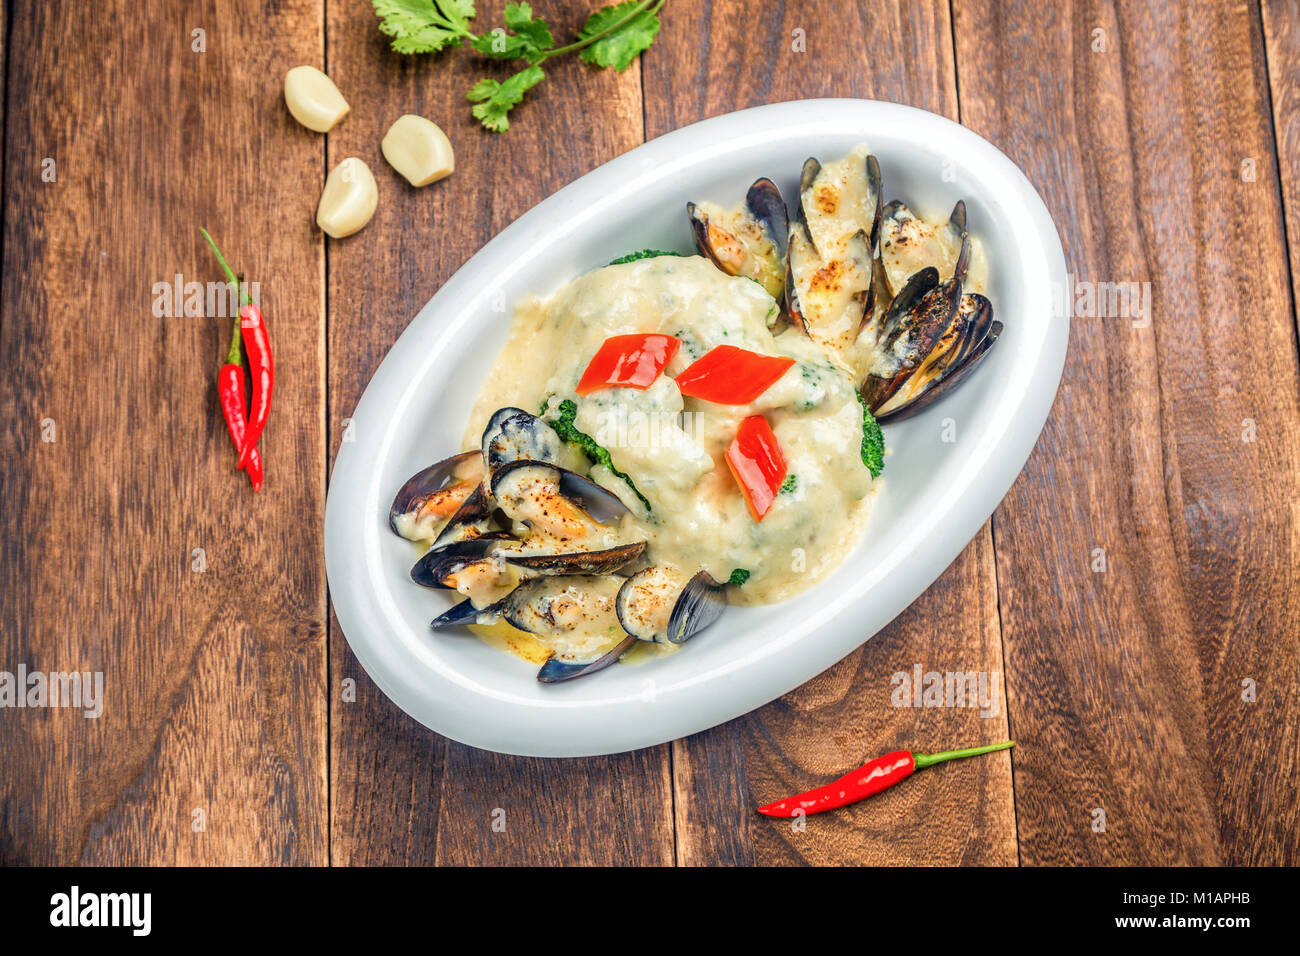 Baked rice with seafood Stock Photo